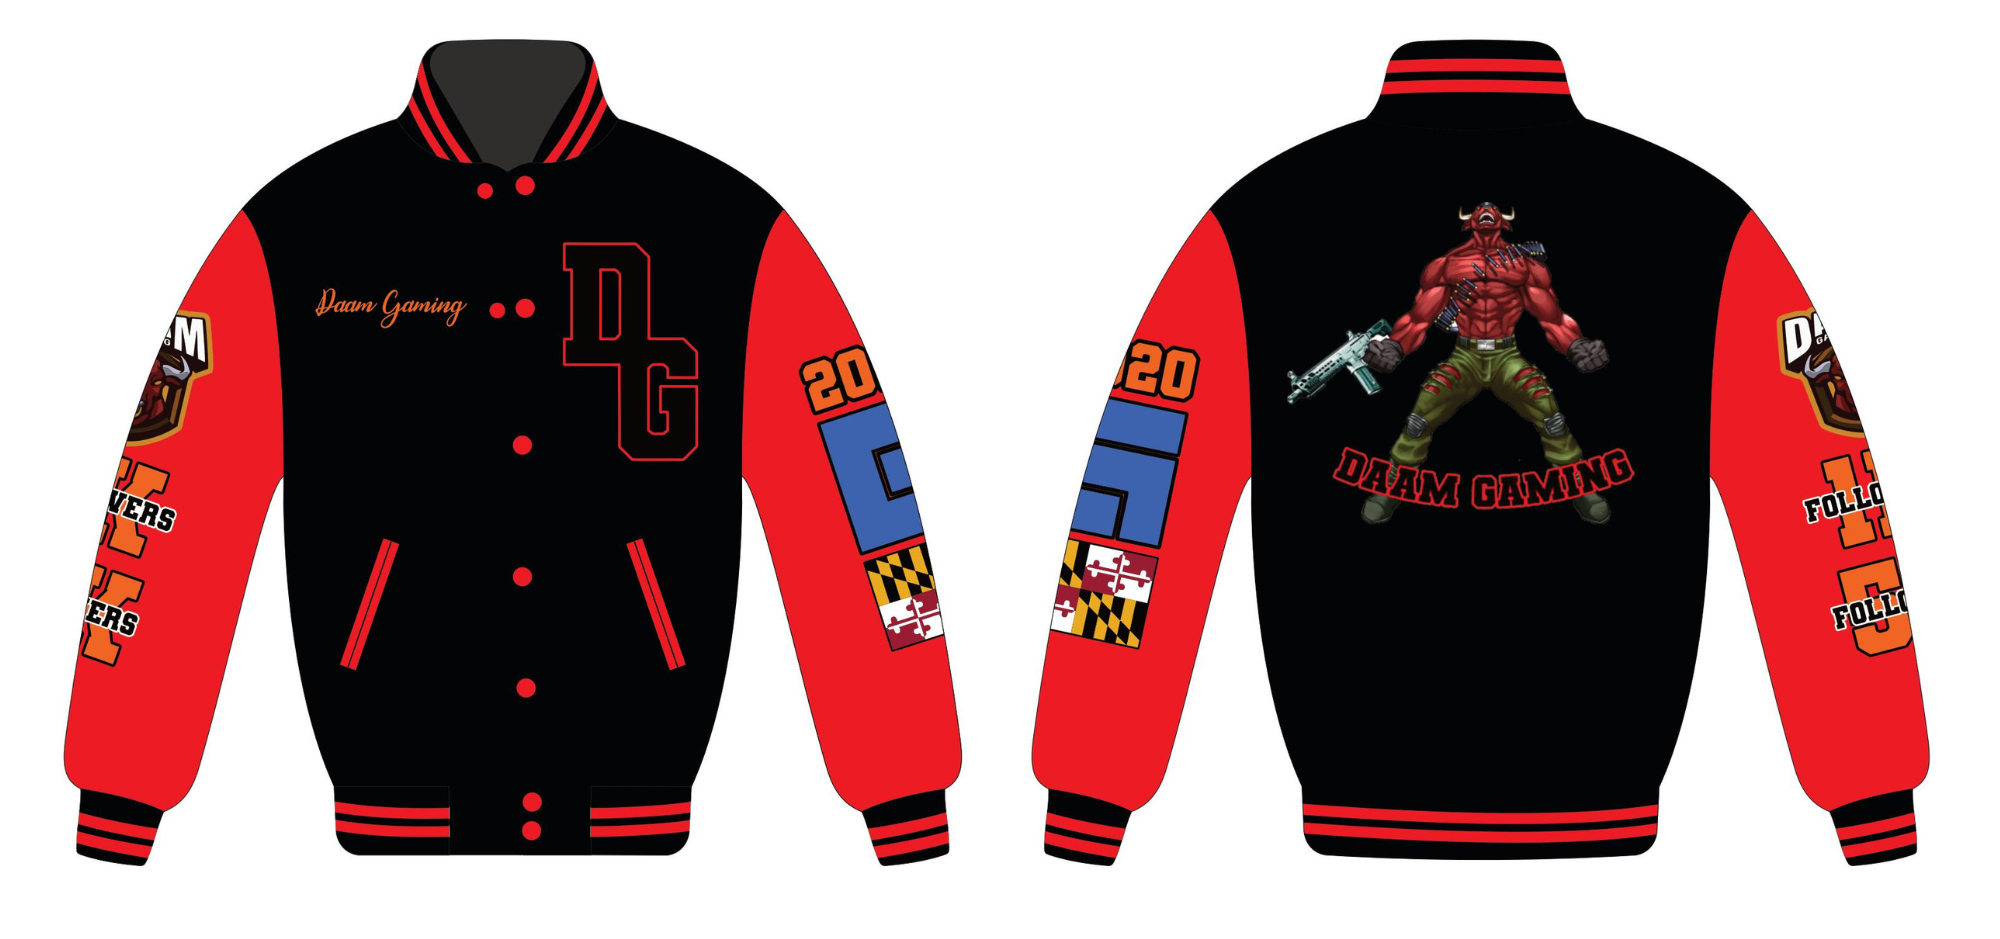 Personalized Embroidered Black & Red Varsity Jackets